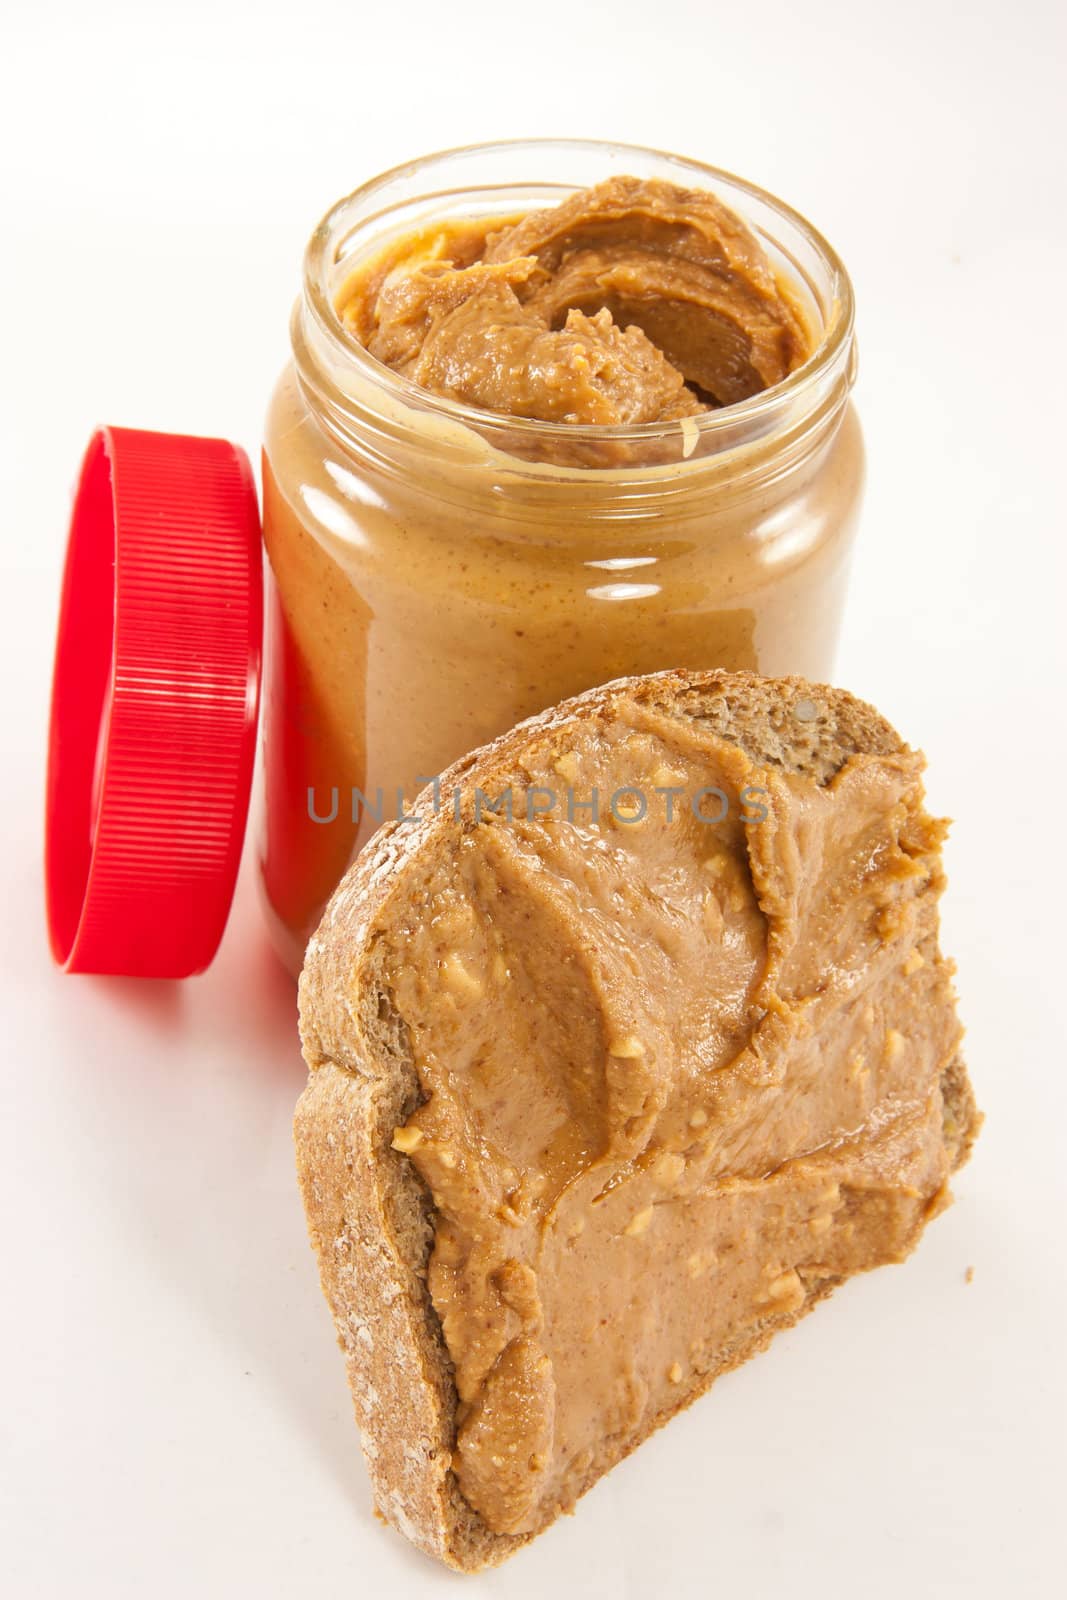 Picture of a slice of bread with some peanut butter on it, and a lid